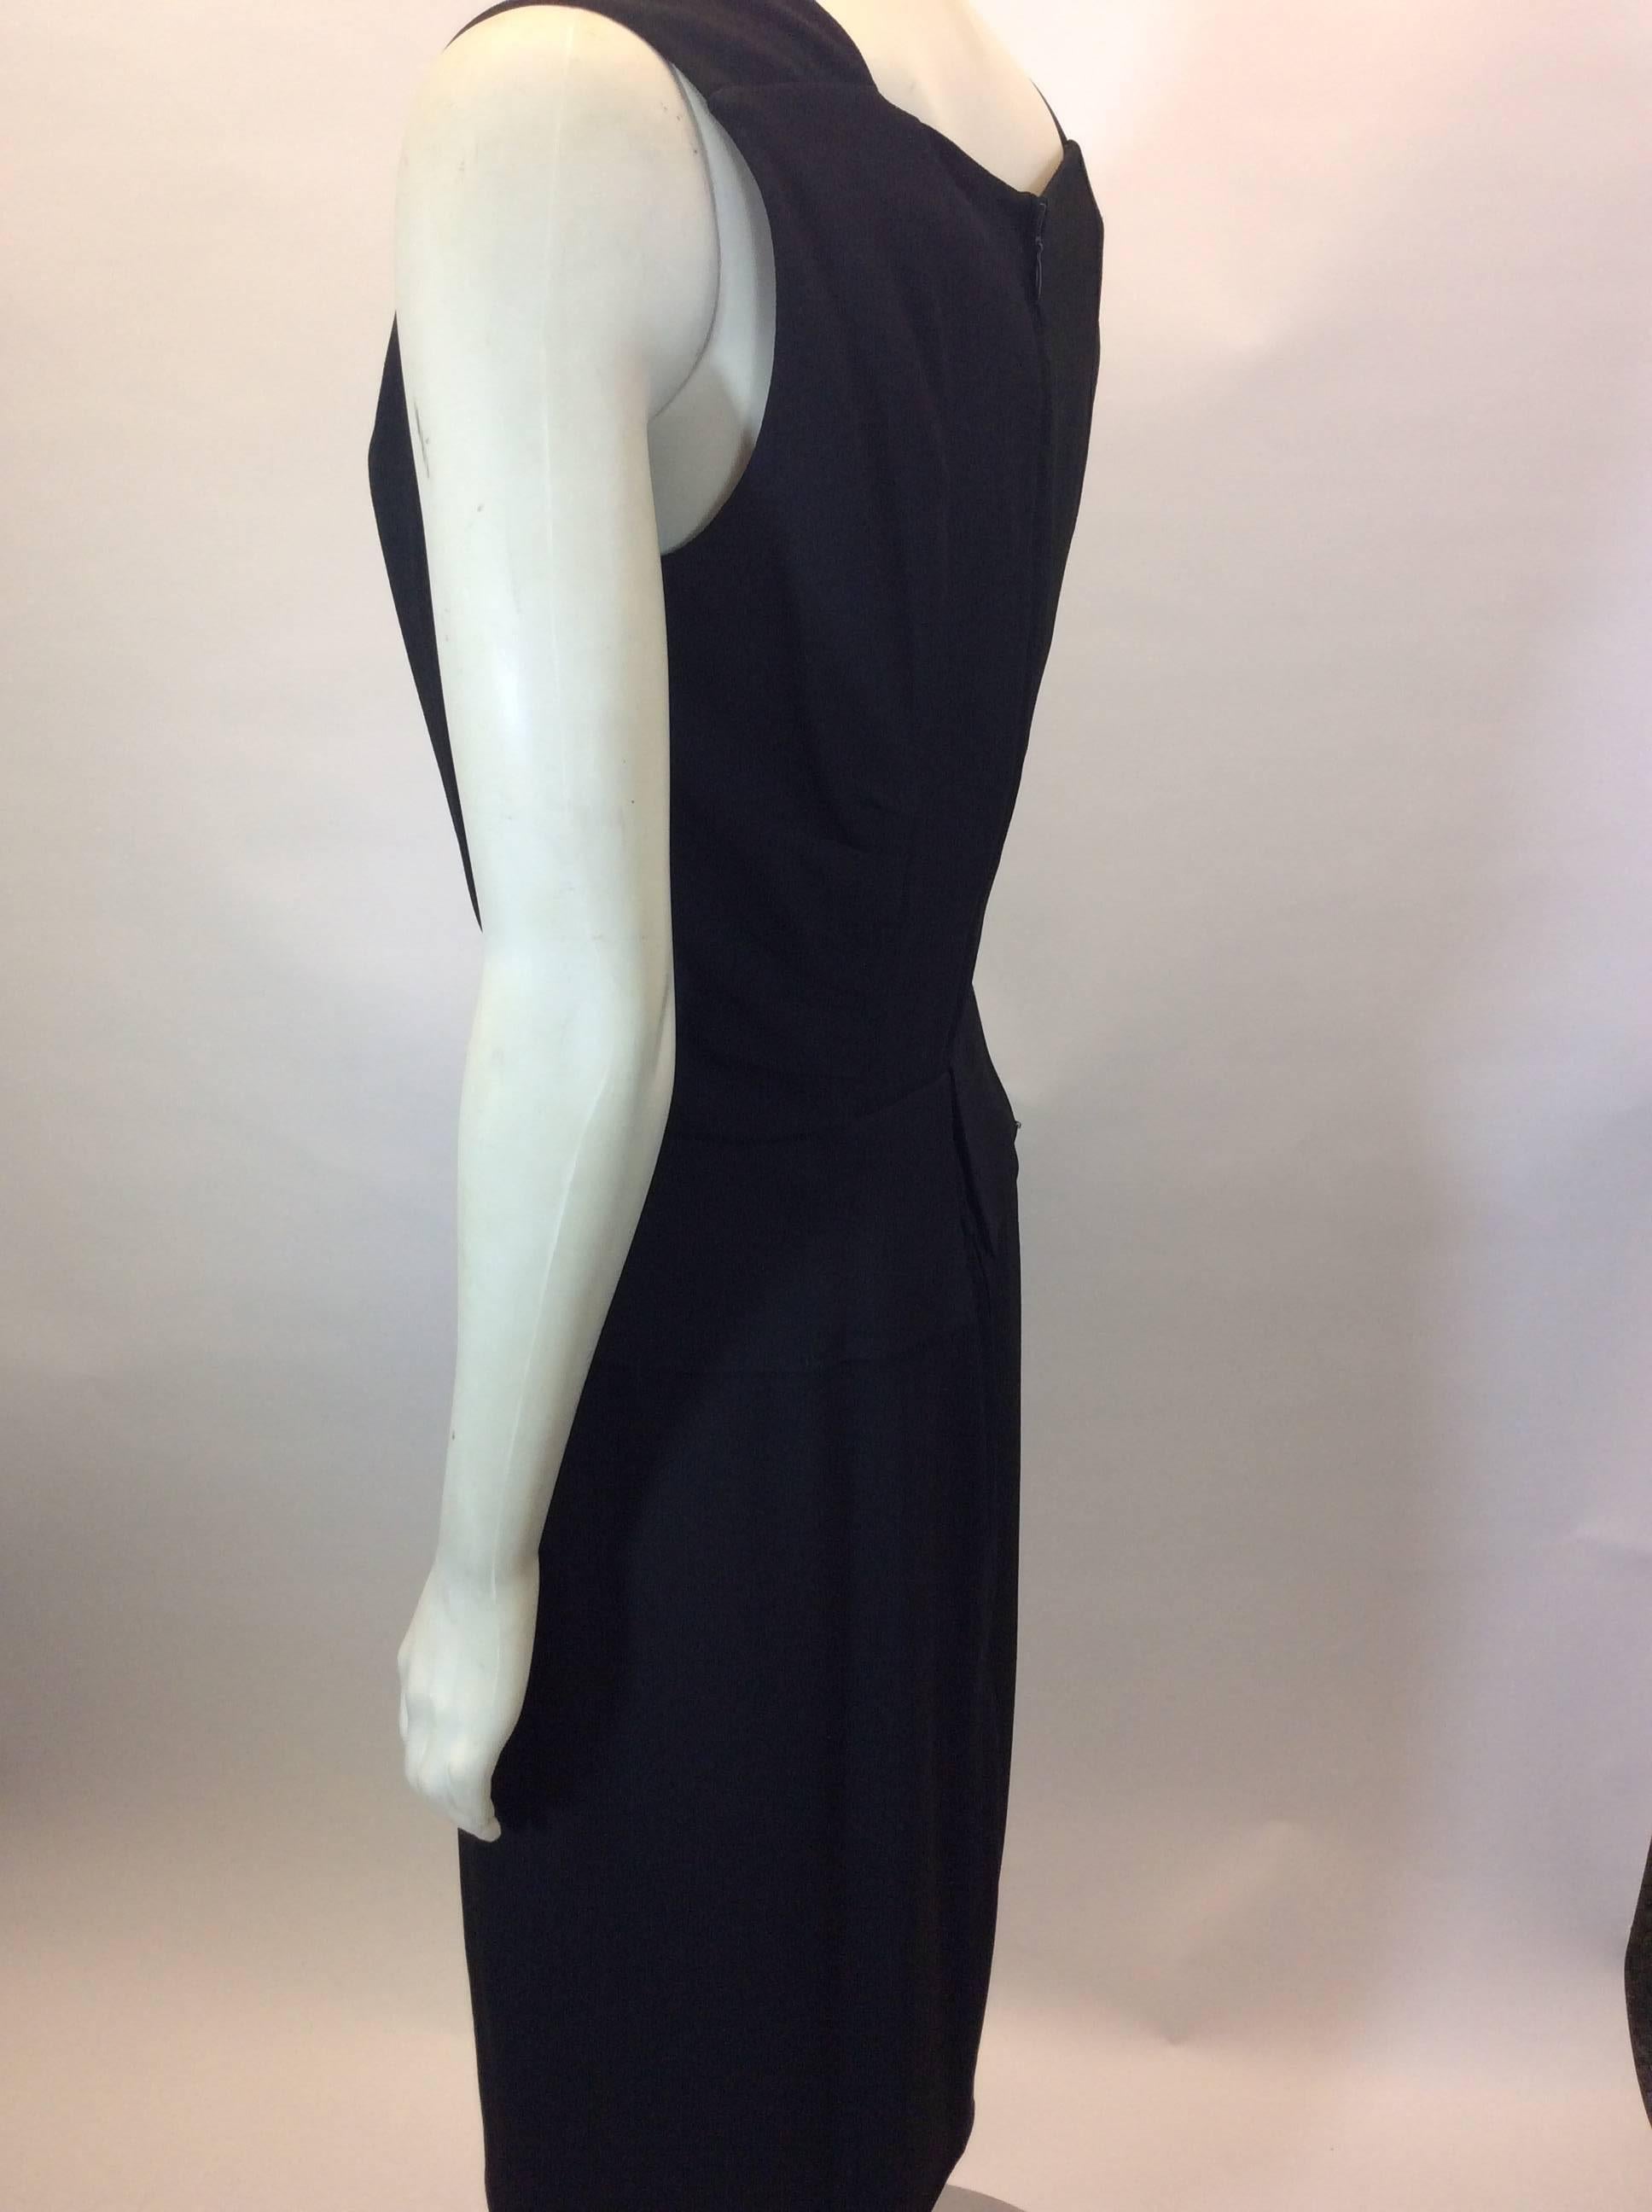 Black V-Neck Dress with Peplum Detail
Center back zipper closure
Small peplum detail on waistline
Sleeveless
Size and fiber content unknown (refer to measurements)
